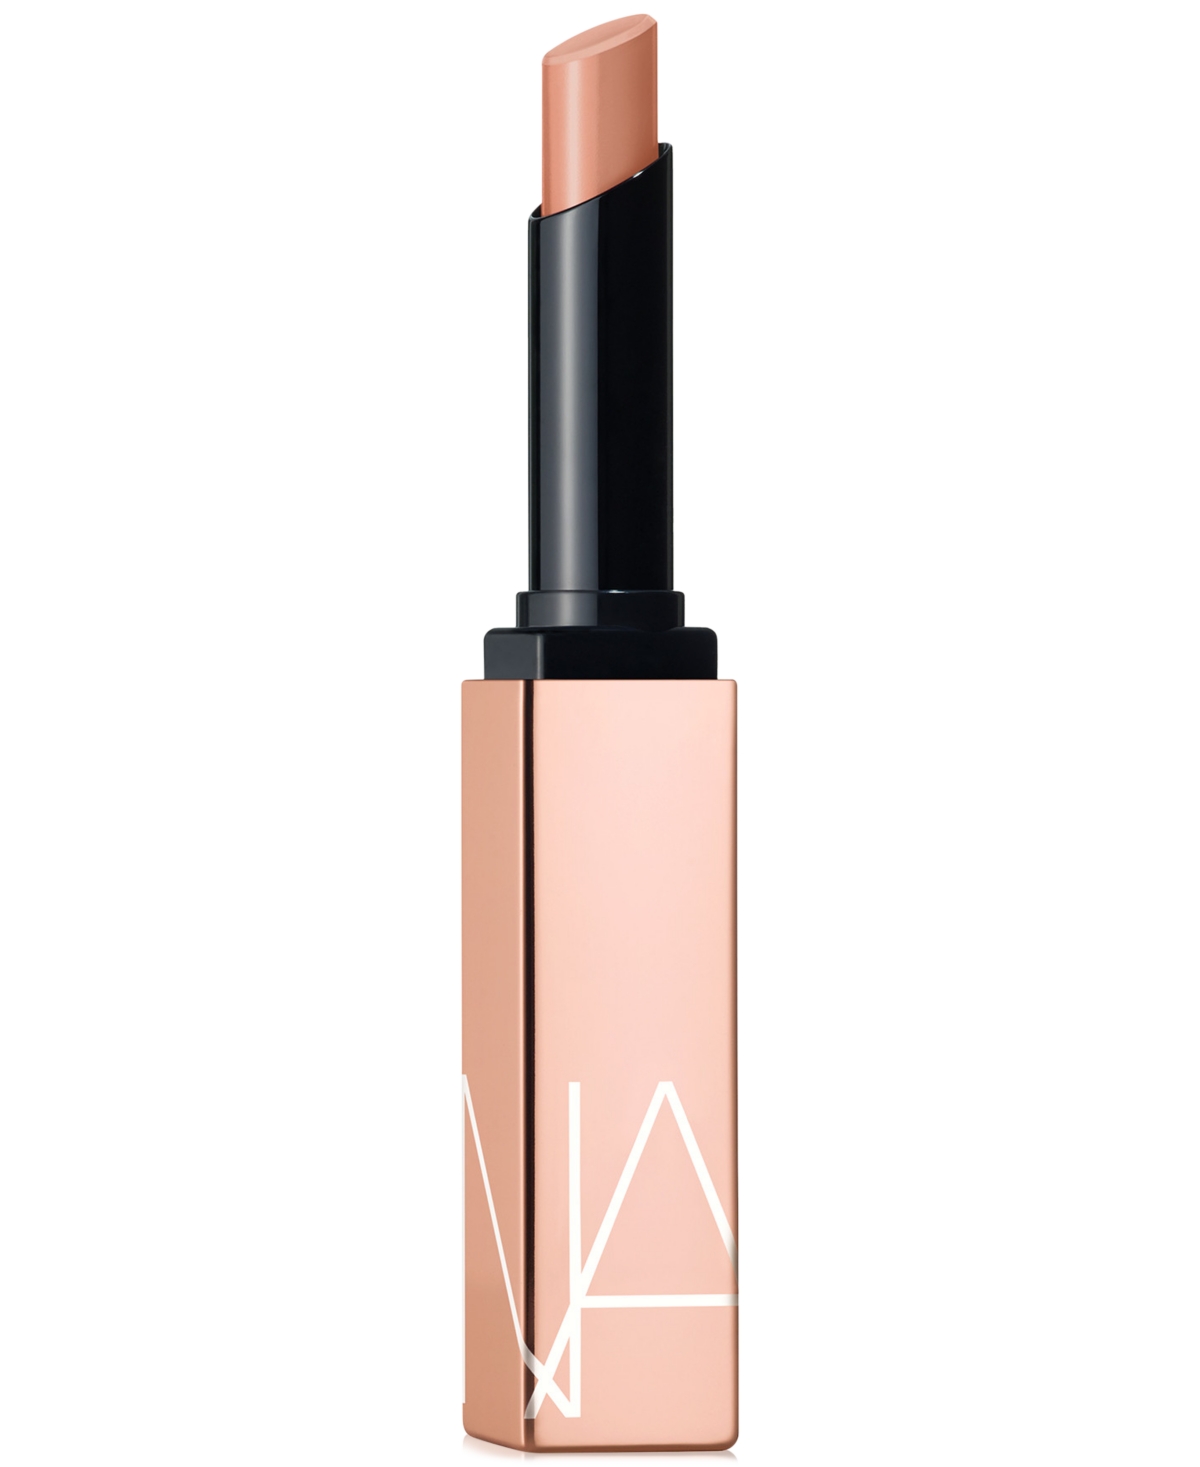 Nars Afterglow Sensual Shine Lipstick In Breathless